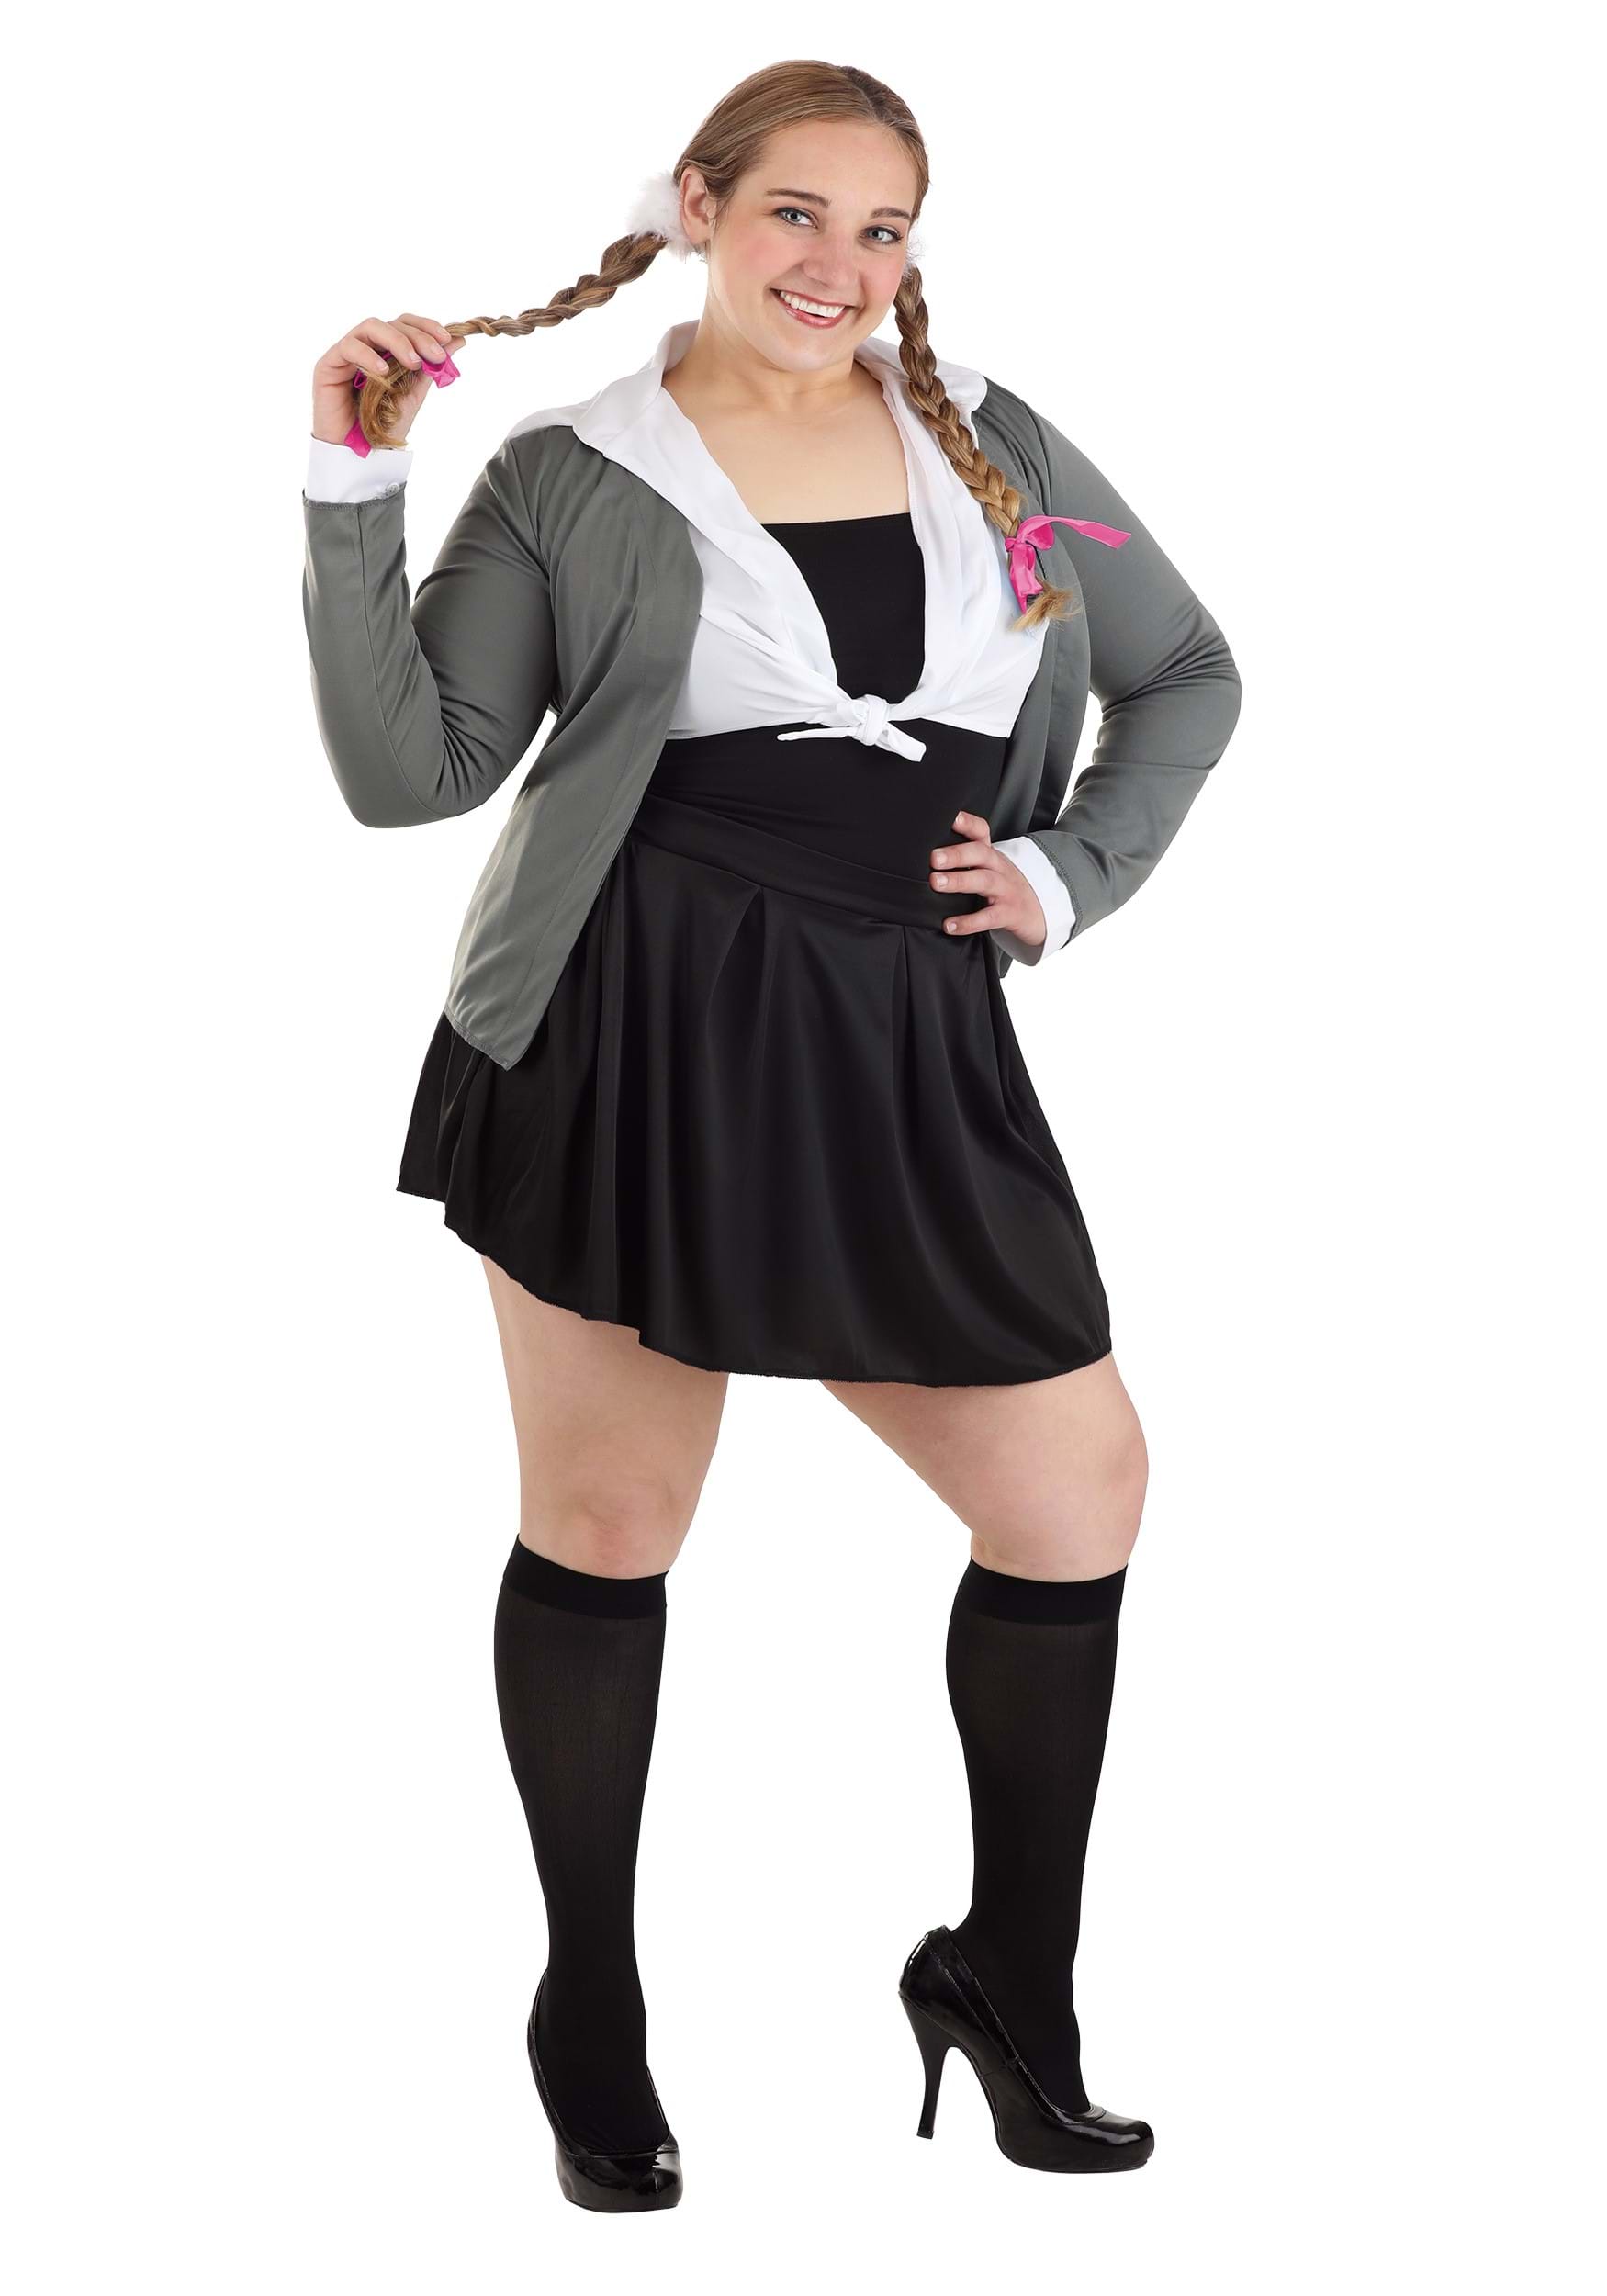 One More Time Pop Singer Costume for Women